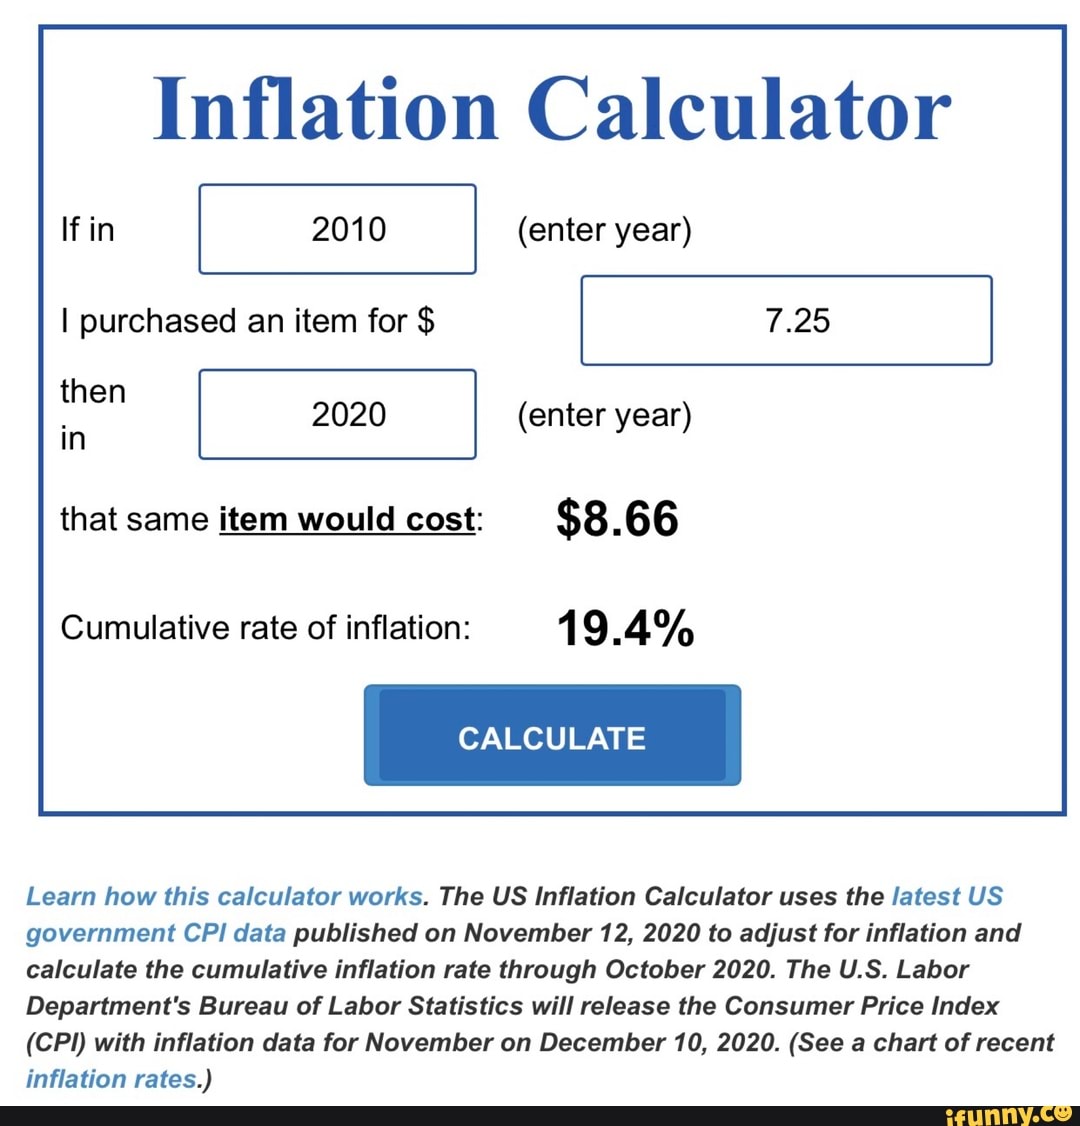 Inflation Calculator If in 2010 (enter year) I purchased an item for